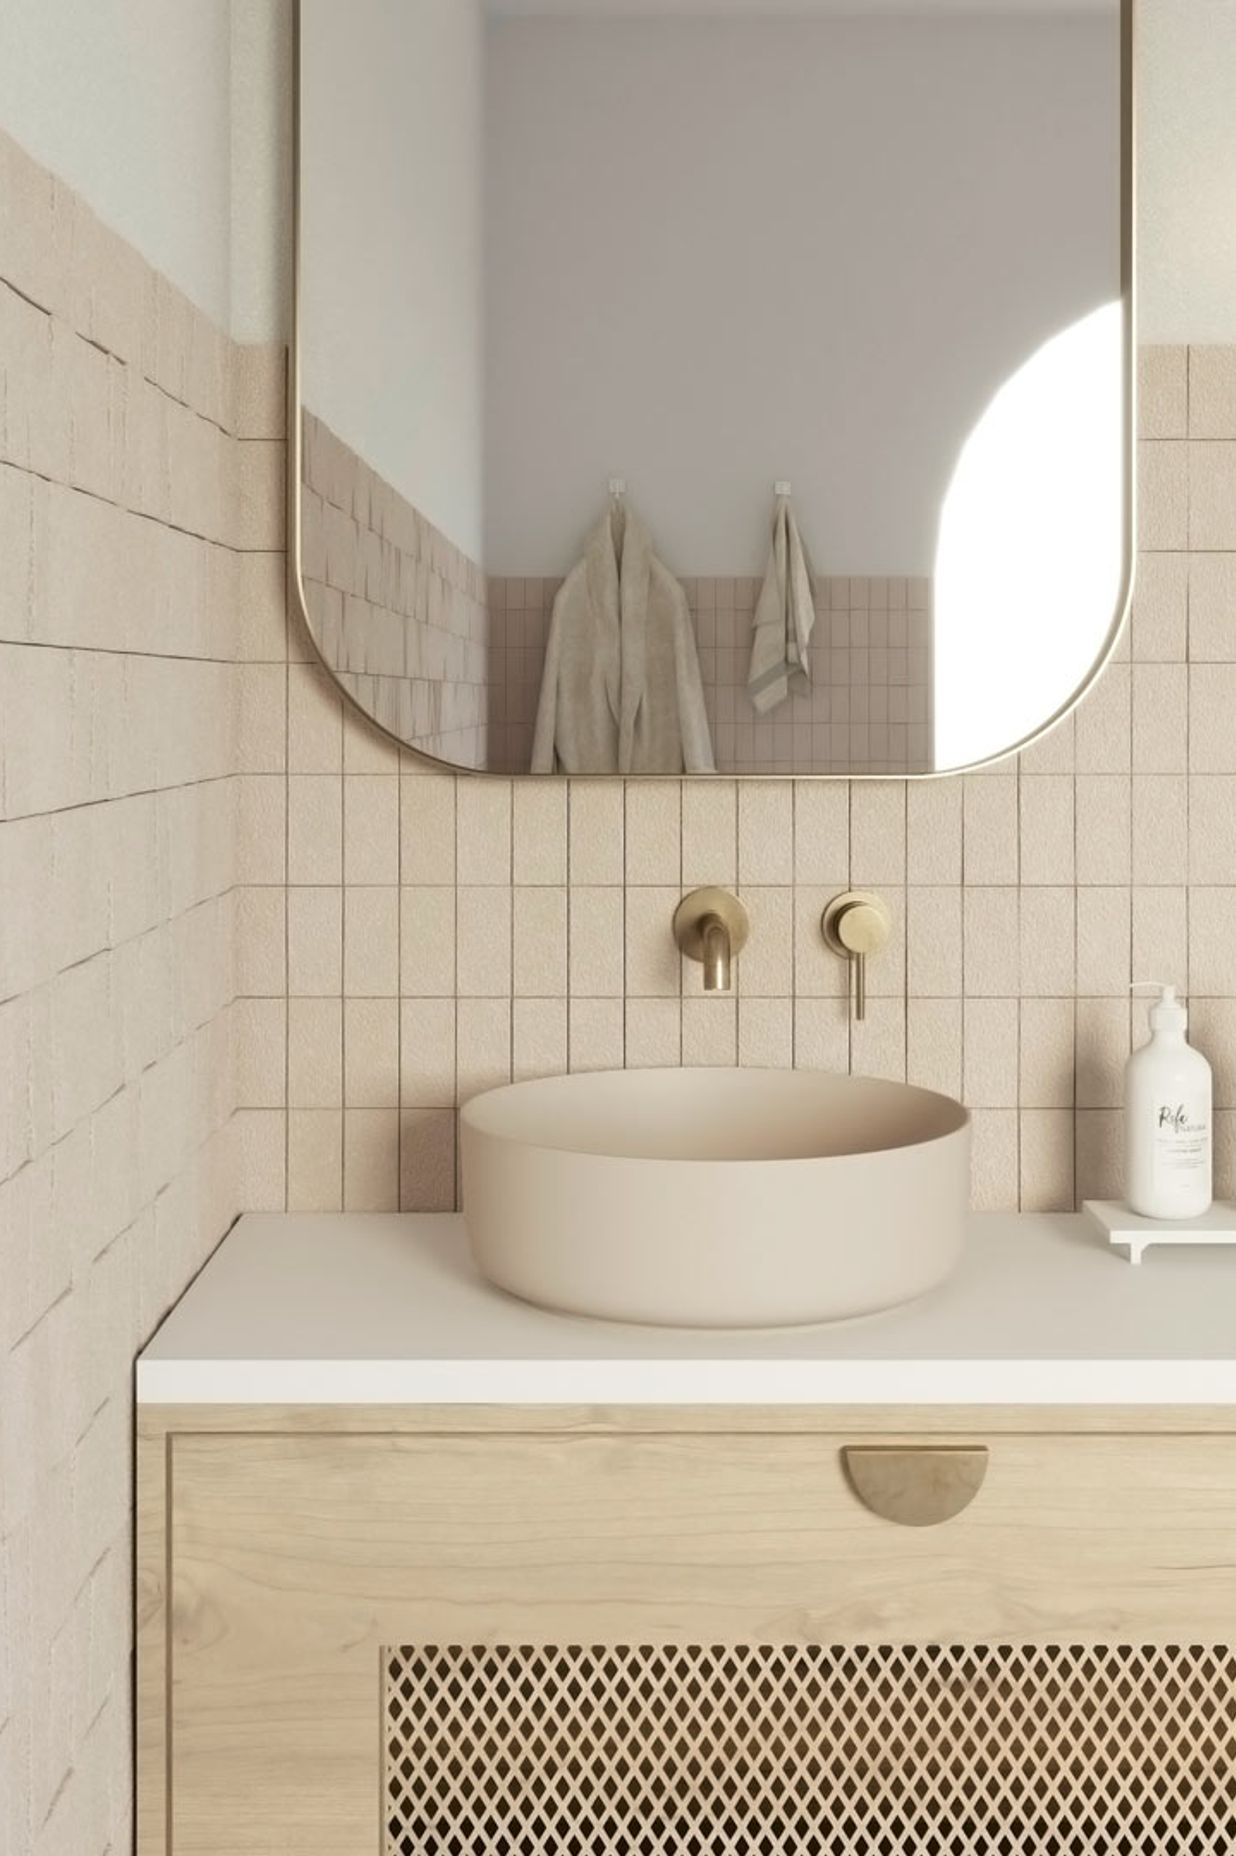 The Celine Basin Sink from ABI Interiors is available in a range of neutral colours.